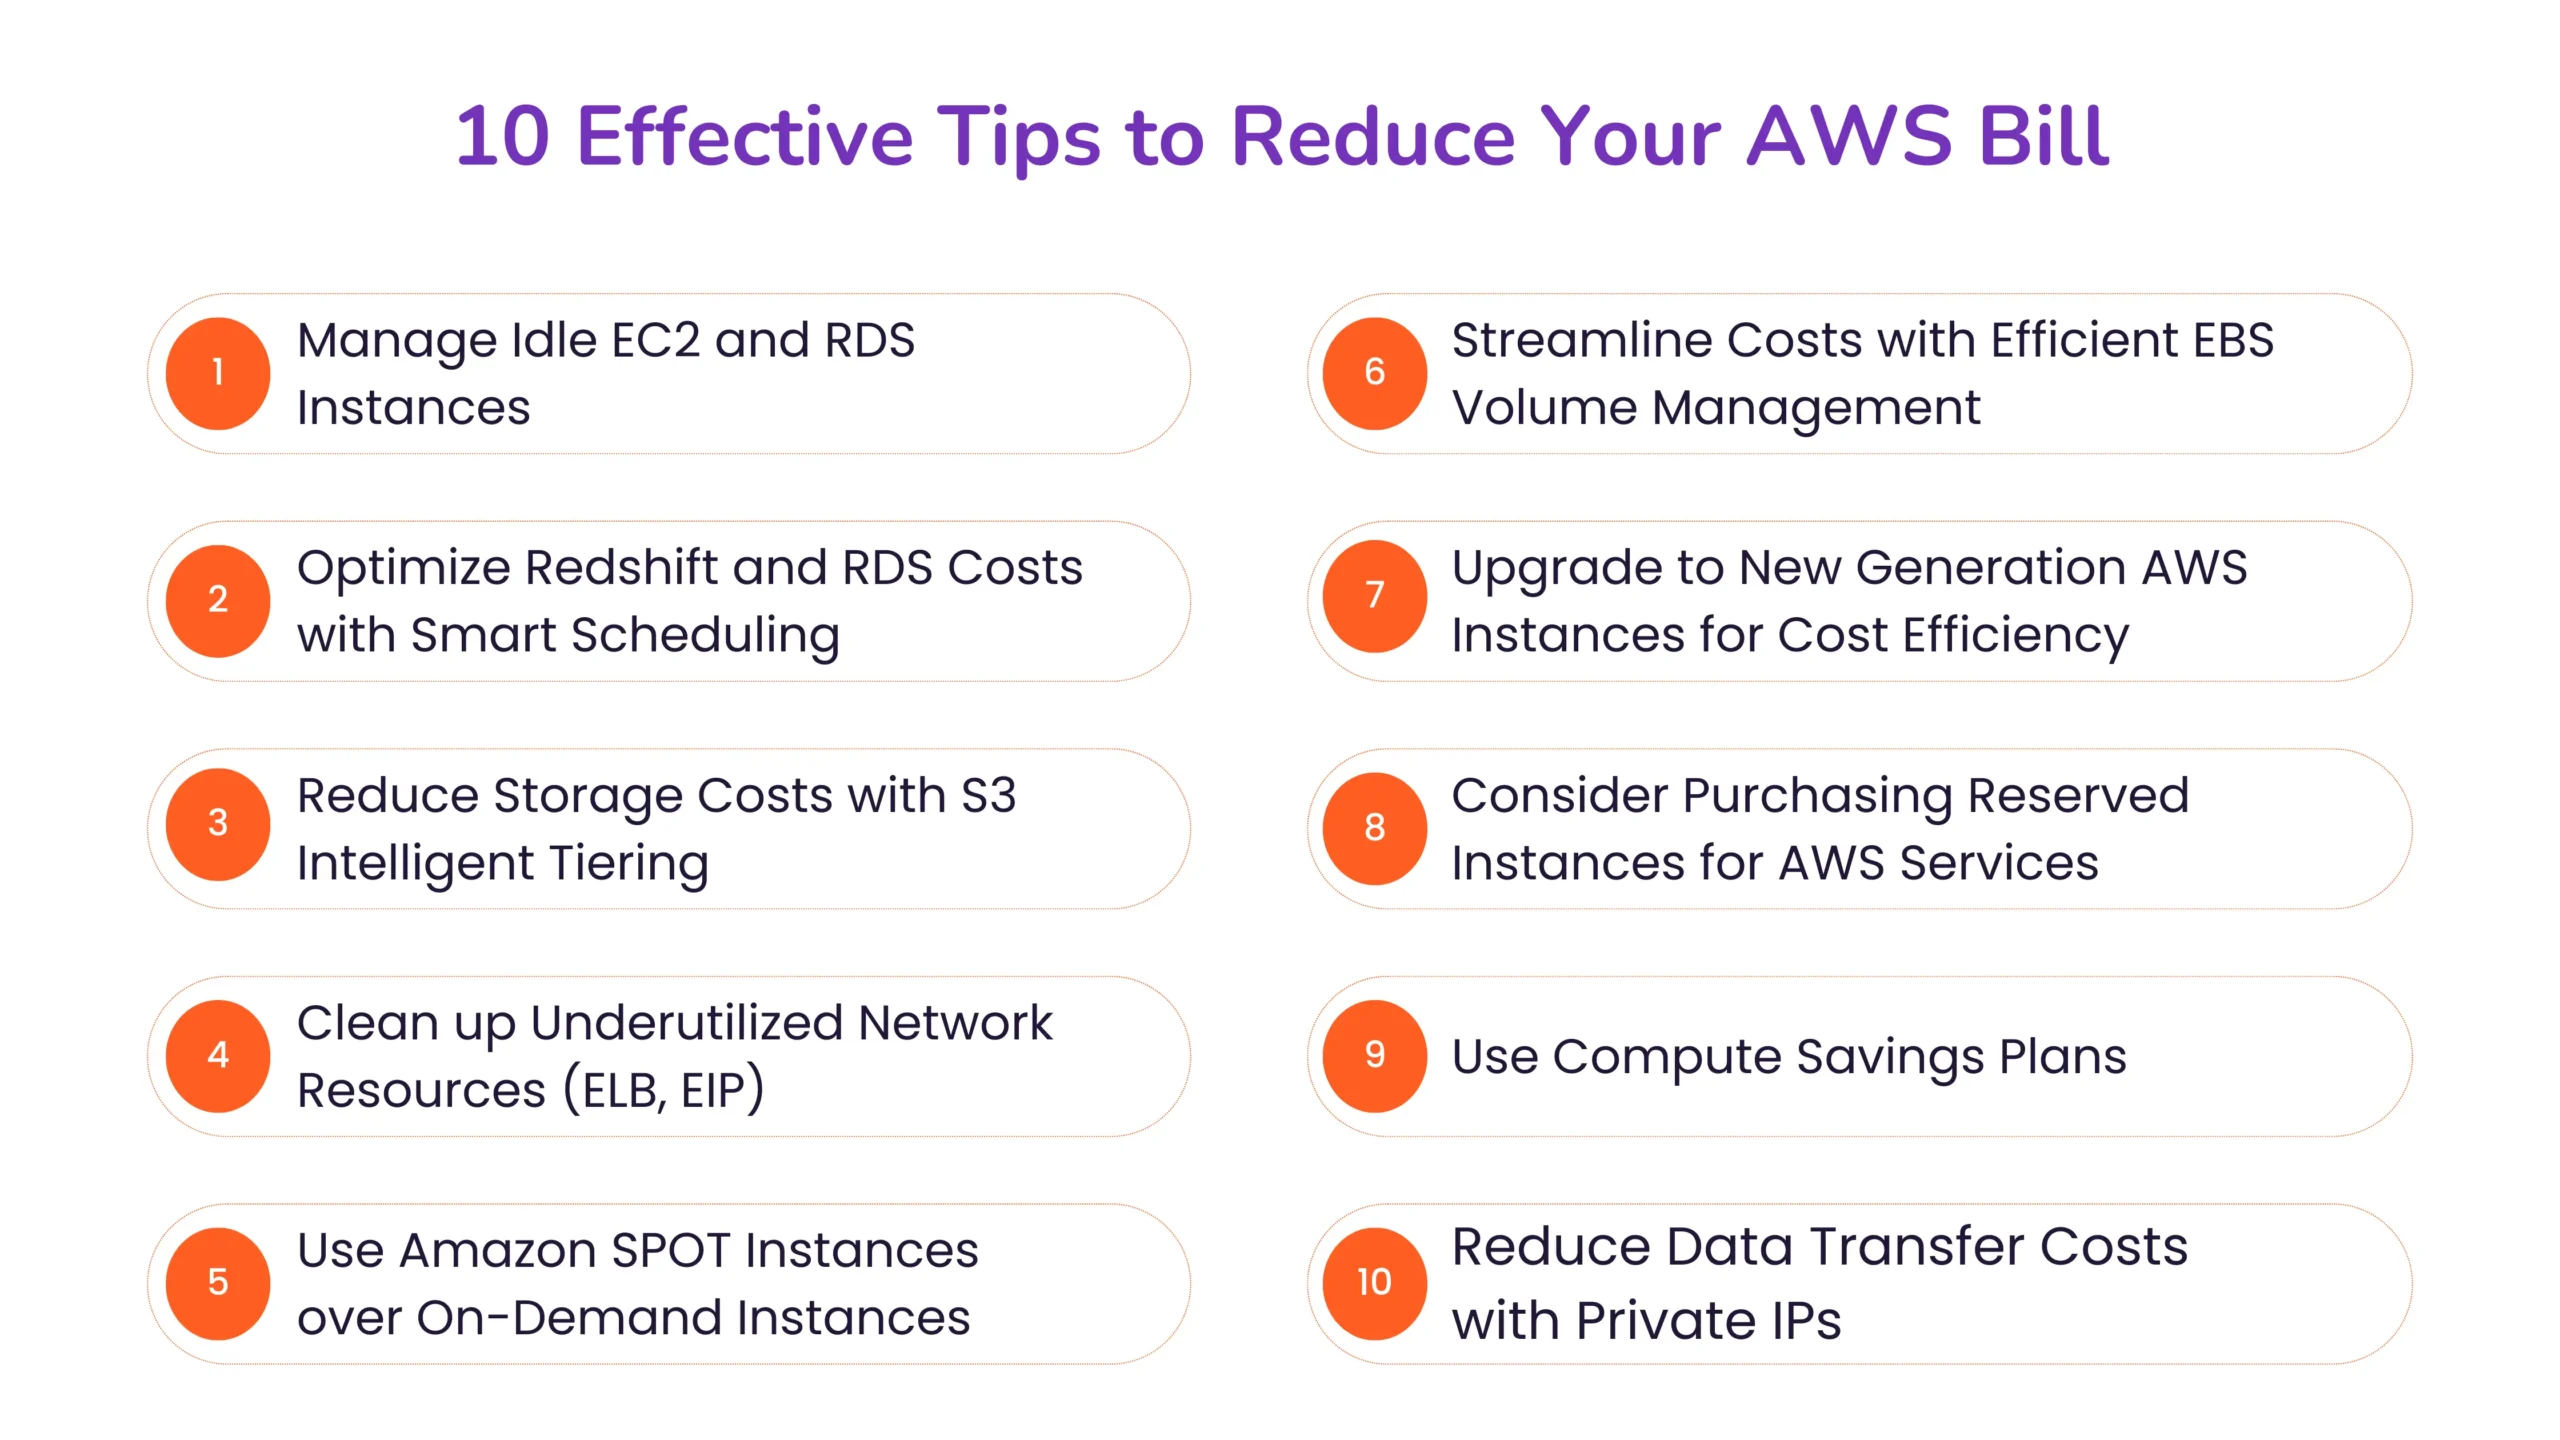 10 Effective Tips to Reduce Your AWS Bill